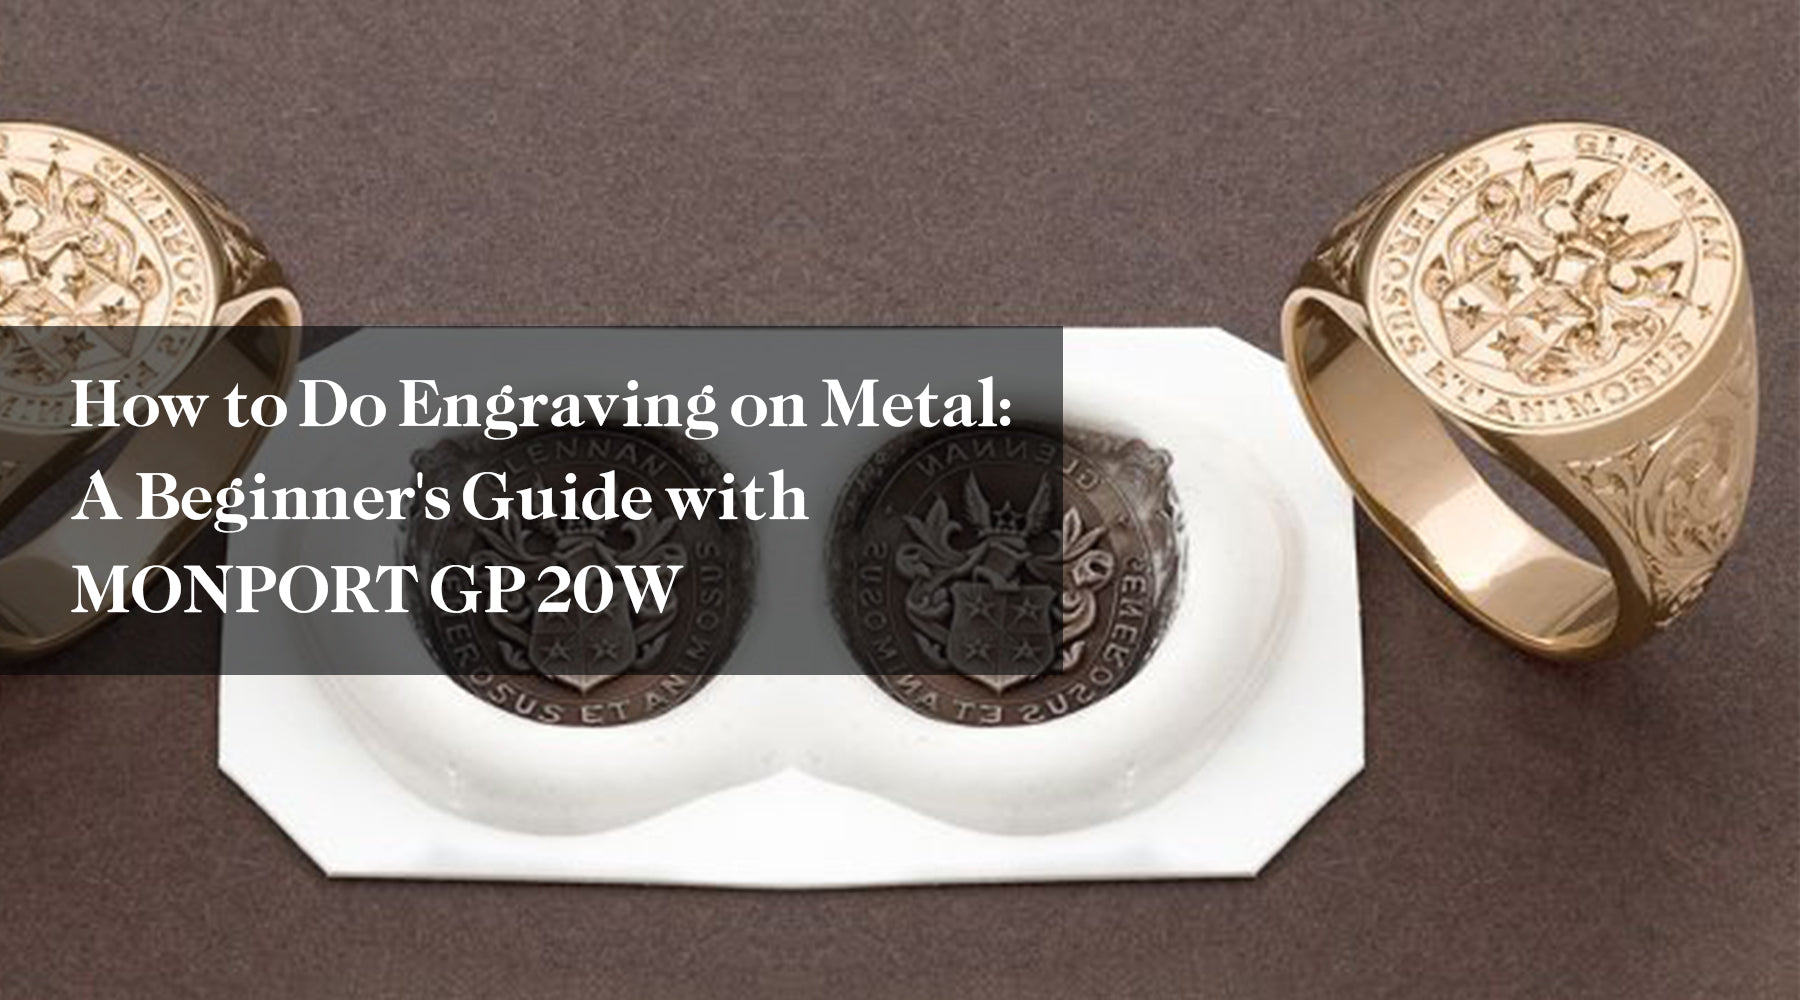 How to Do Engraving on Metal: A Beginner's Guide with MONPORT GP 20W